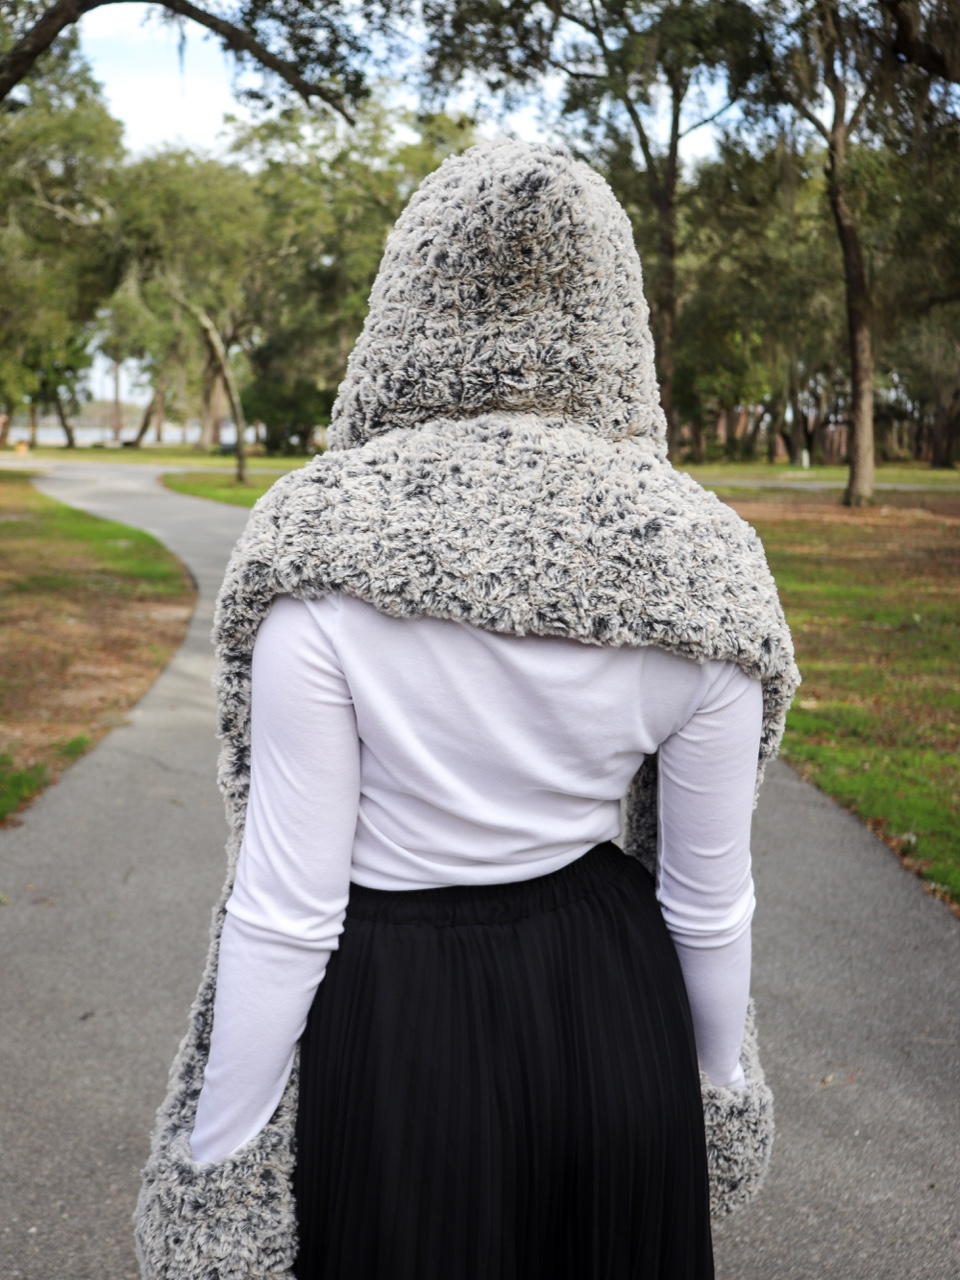 Faux Fur Hooded Scarf With Pockets | AllFreeCrochet.com